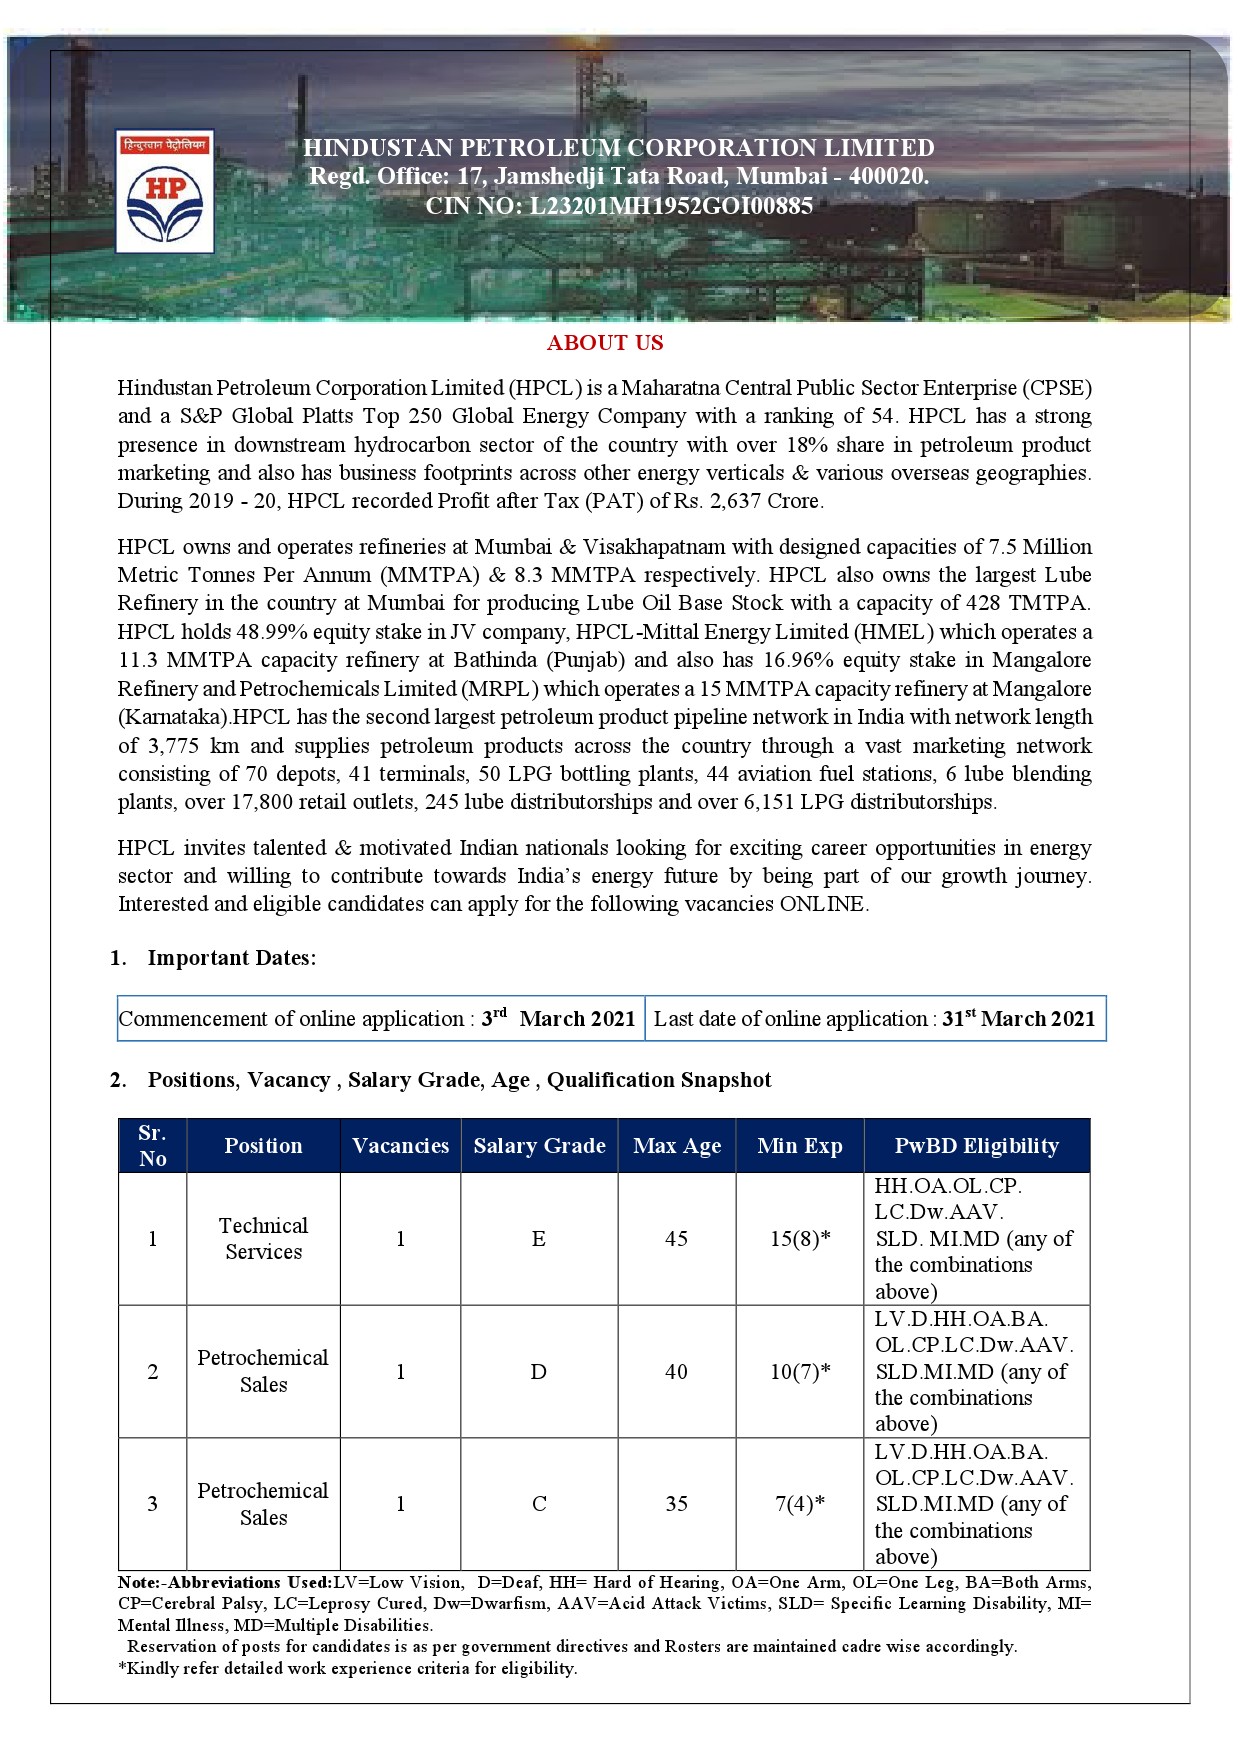 Technical Services and Petrochemical Sales in HPCL - Notification Image 1